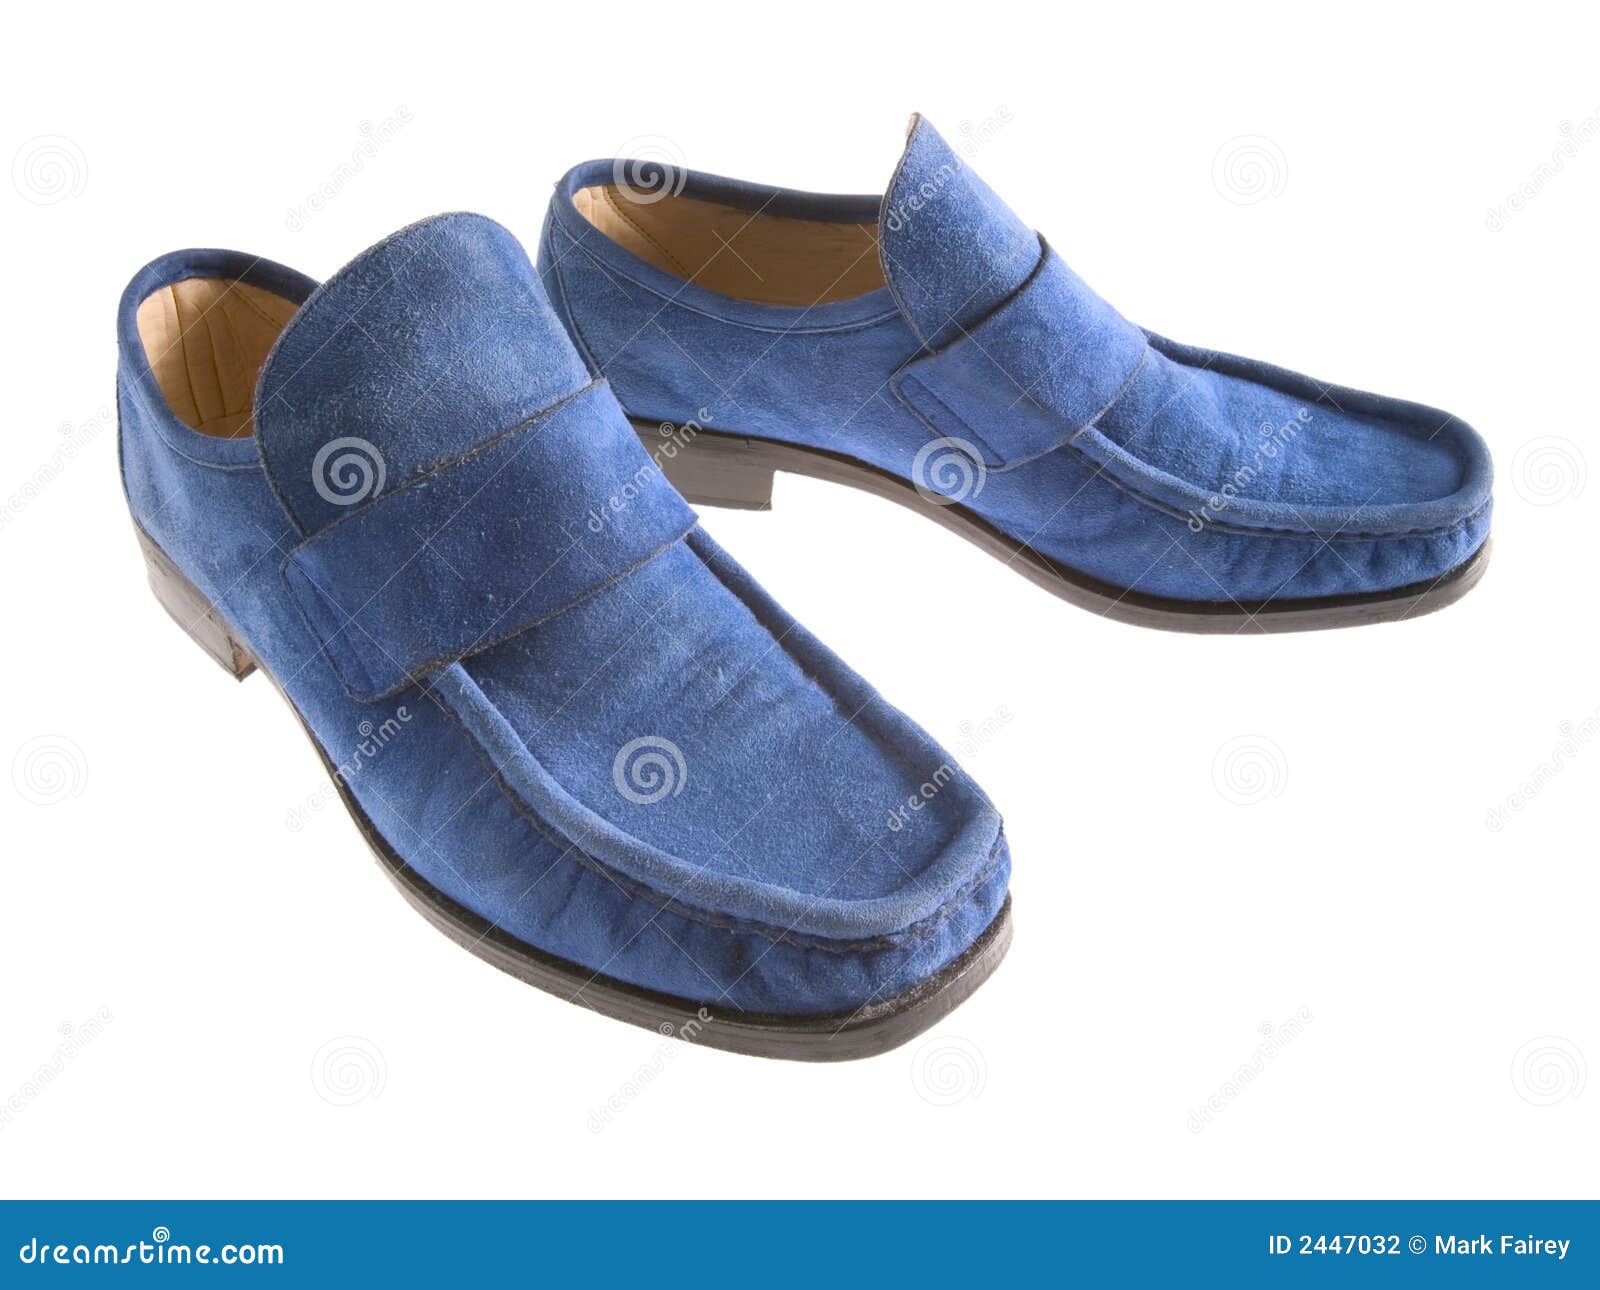 20 Suede Shoes High Res Illustrations - Getty Images